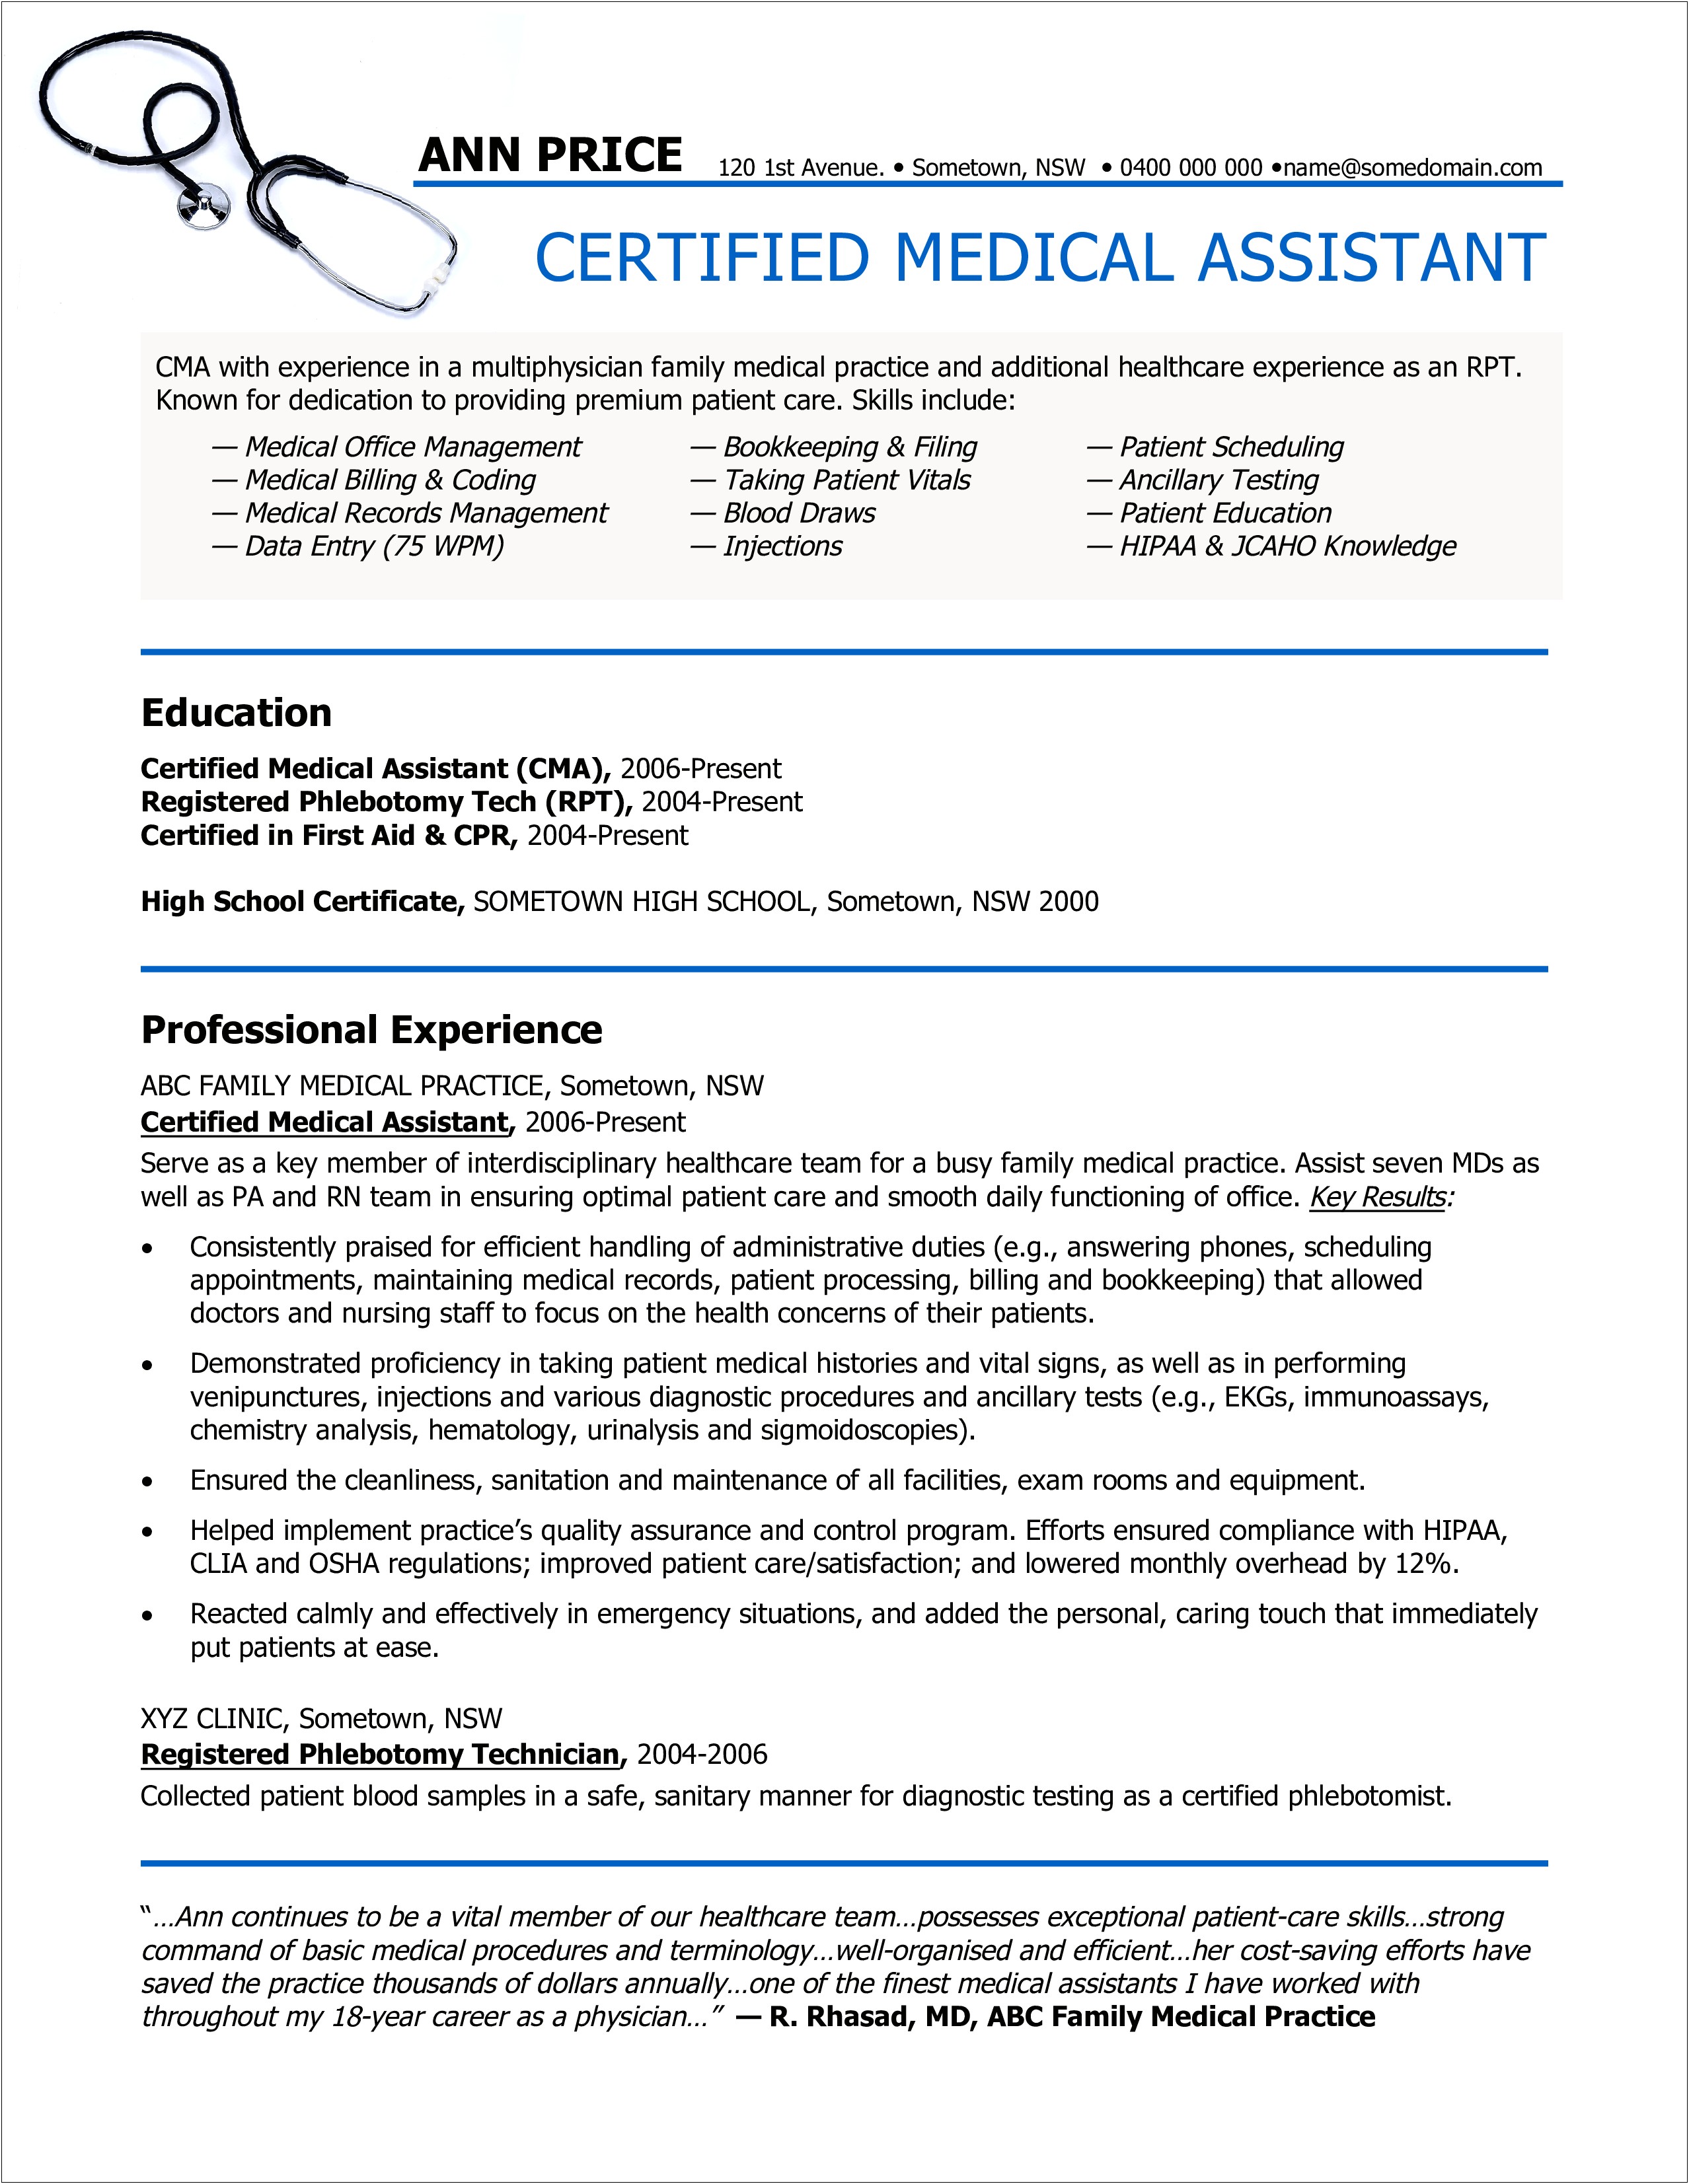 Experienced Physician Assistant Resume Examples